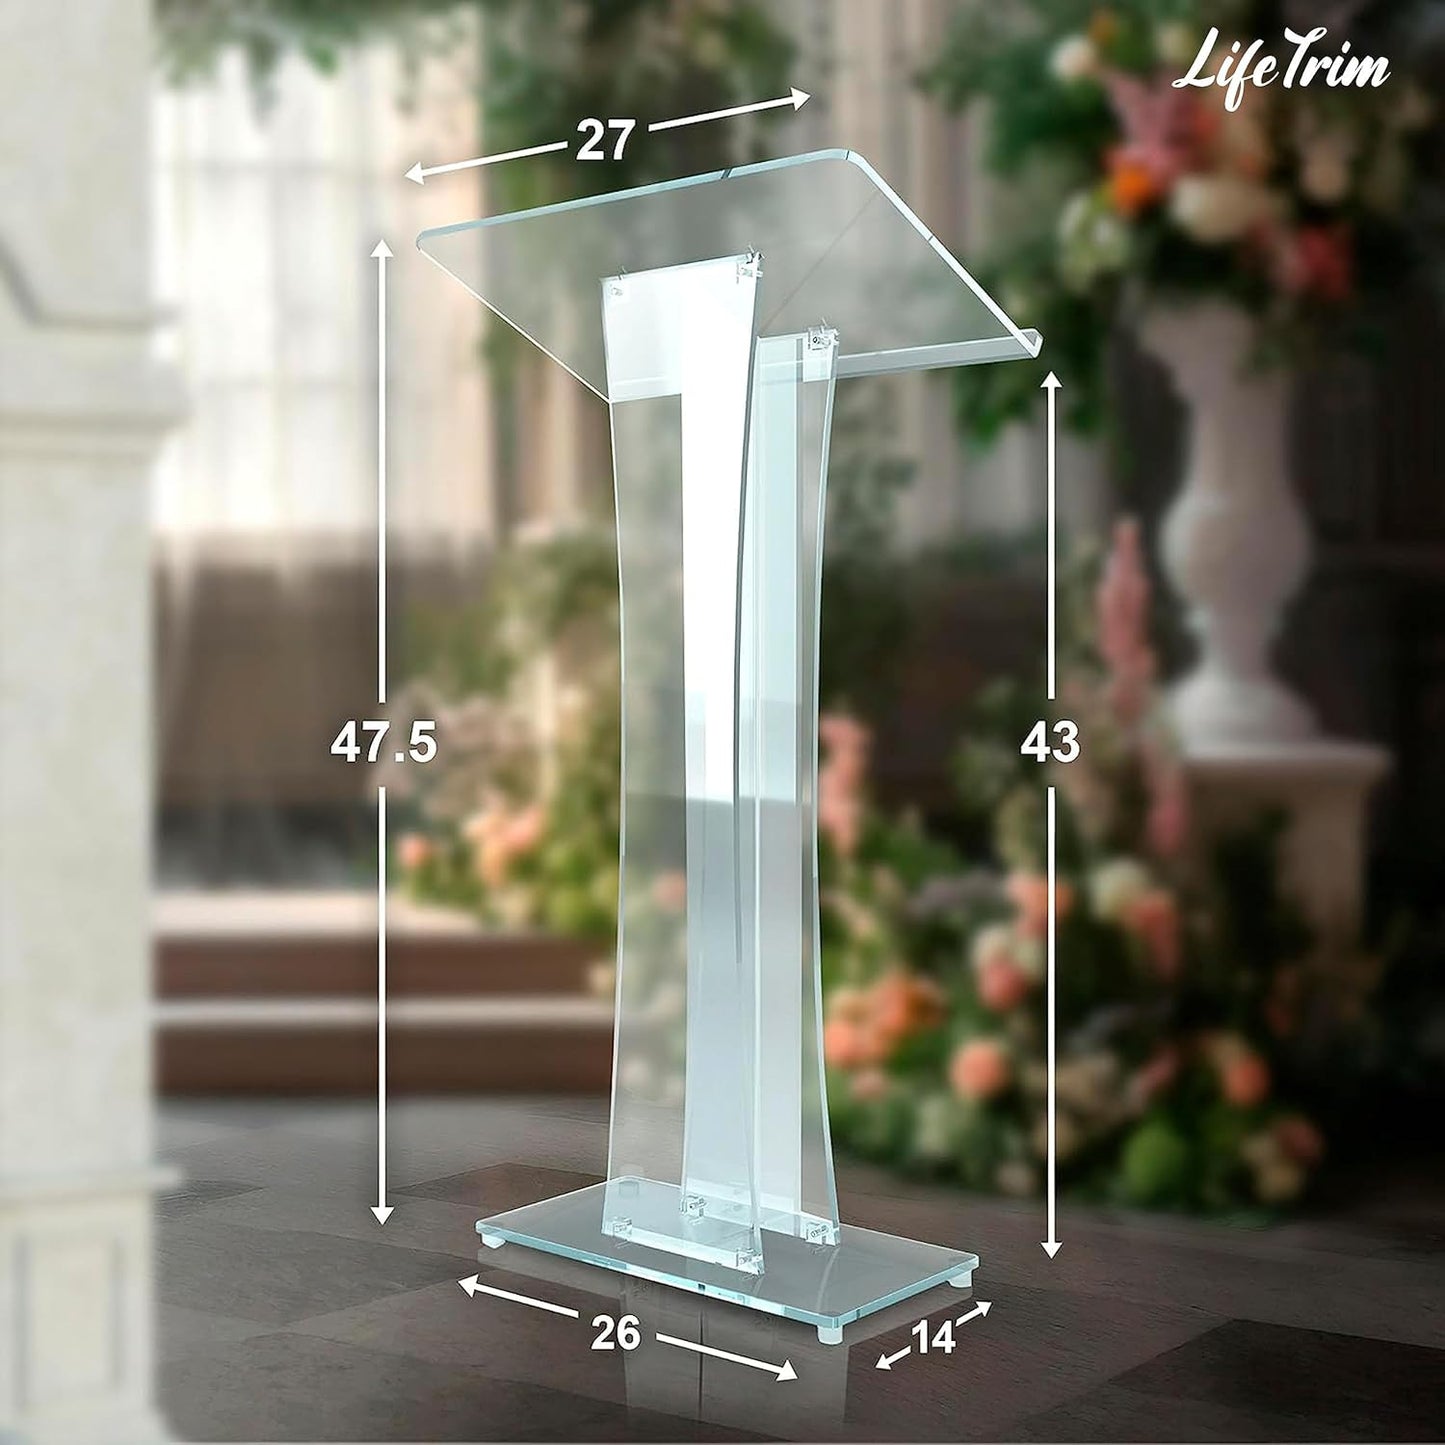 Acrylic Podium Stand Portable Pulpits for Churches Clear Podium Lectern Shtender Hostess Stand Presentation Events Teacher Podium for Classroom Church Pulpit Transparent Modern Lecterns & Po